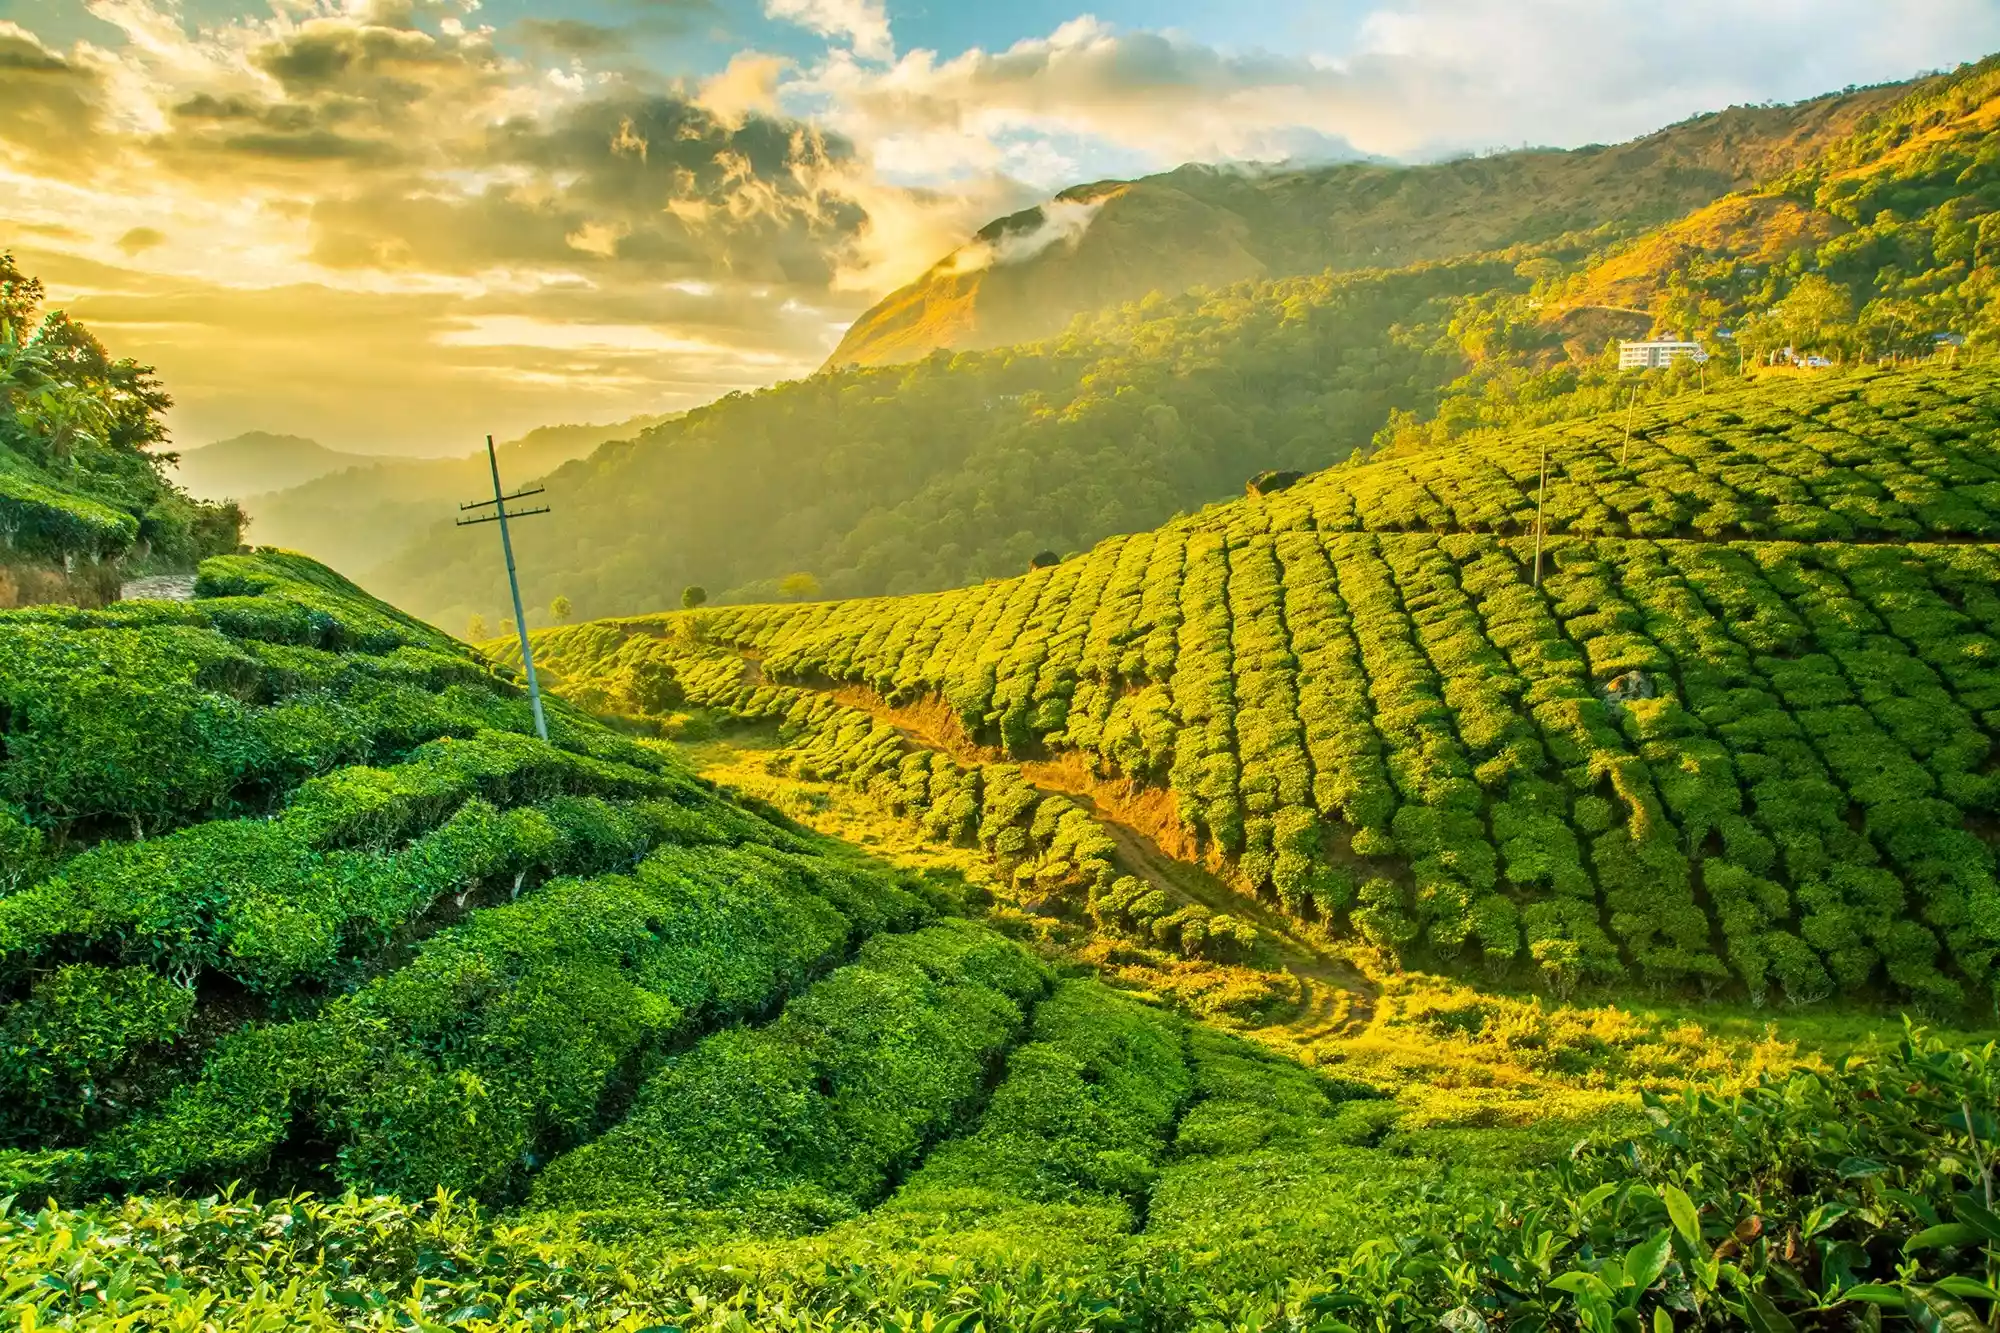 Tourist activities in Munnar India: Activities that tourists can do